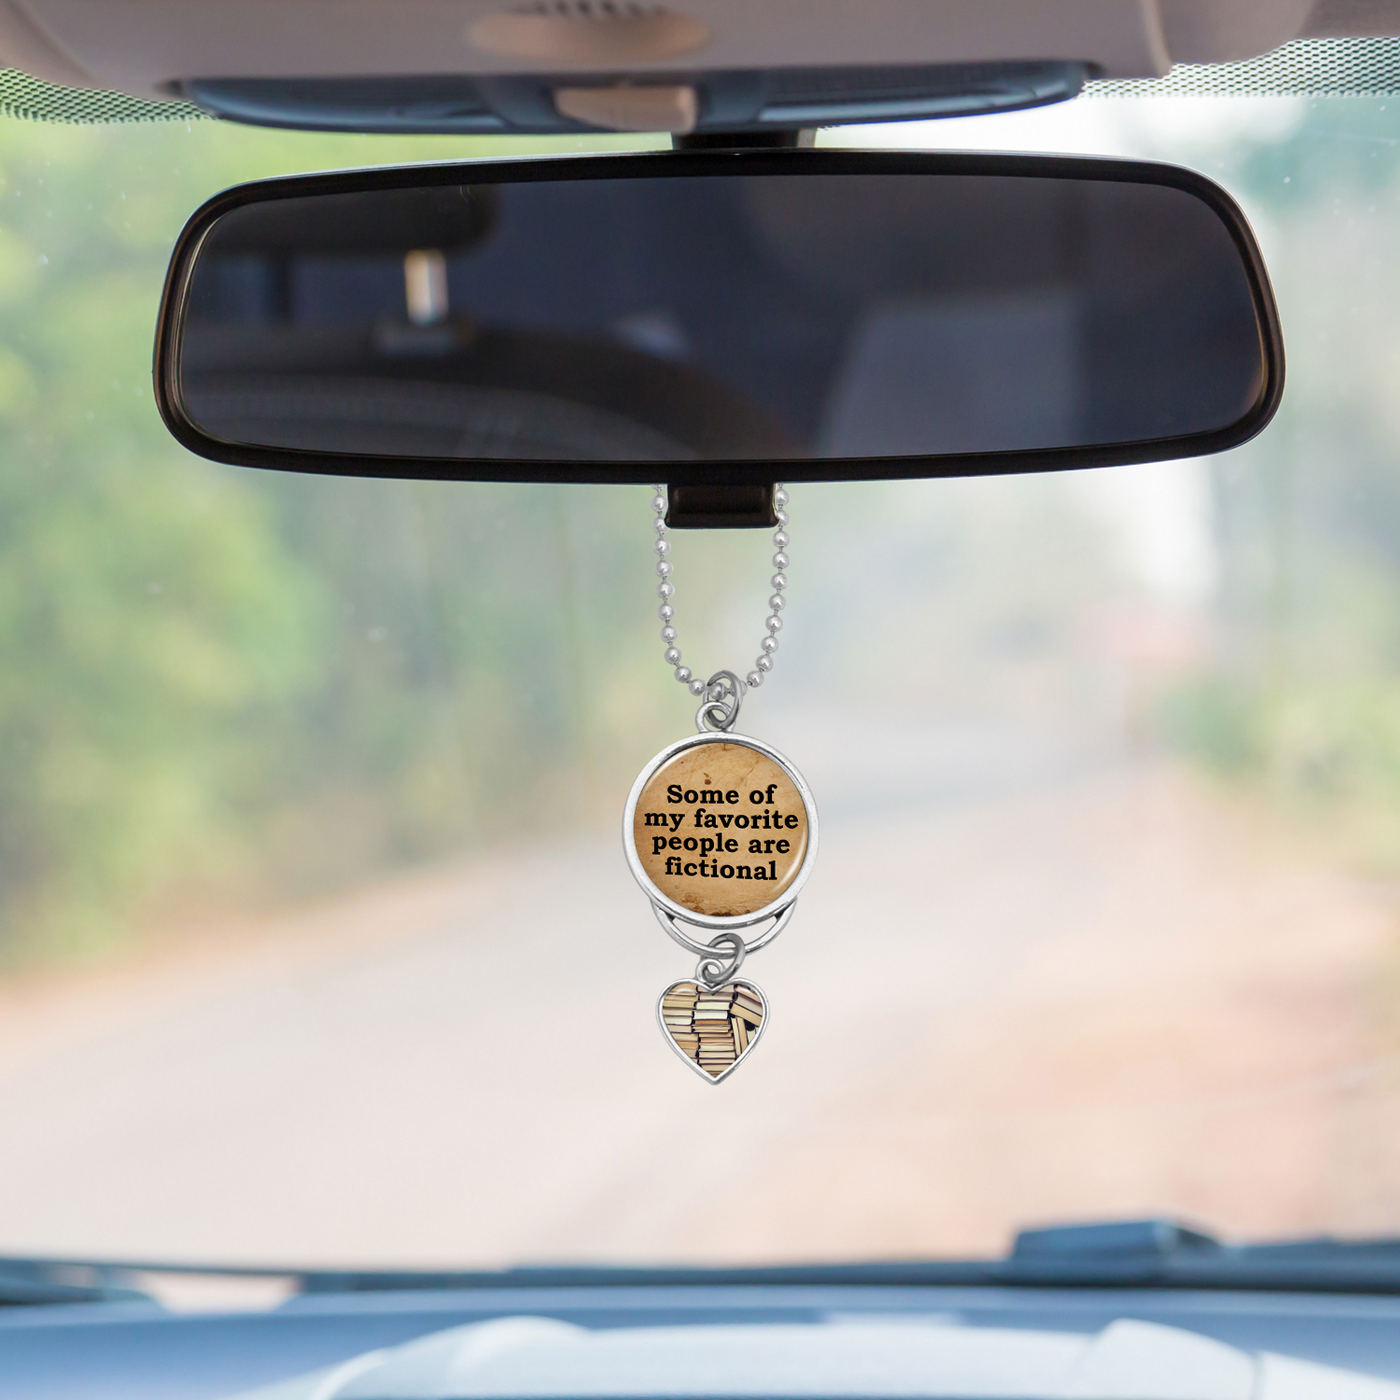 Some Of My Favorite People Are Fictional Rearview Mirror Charm